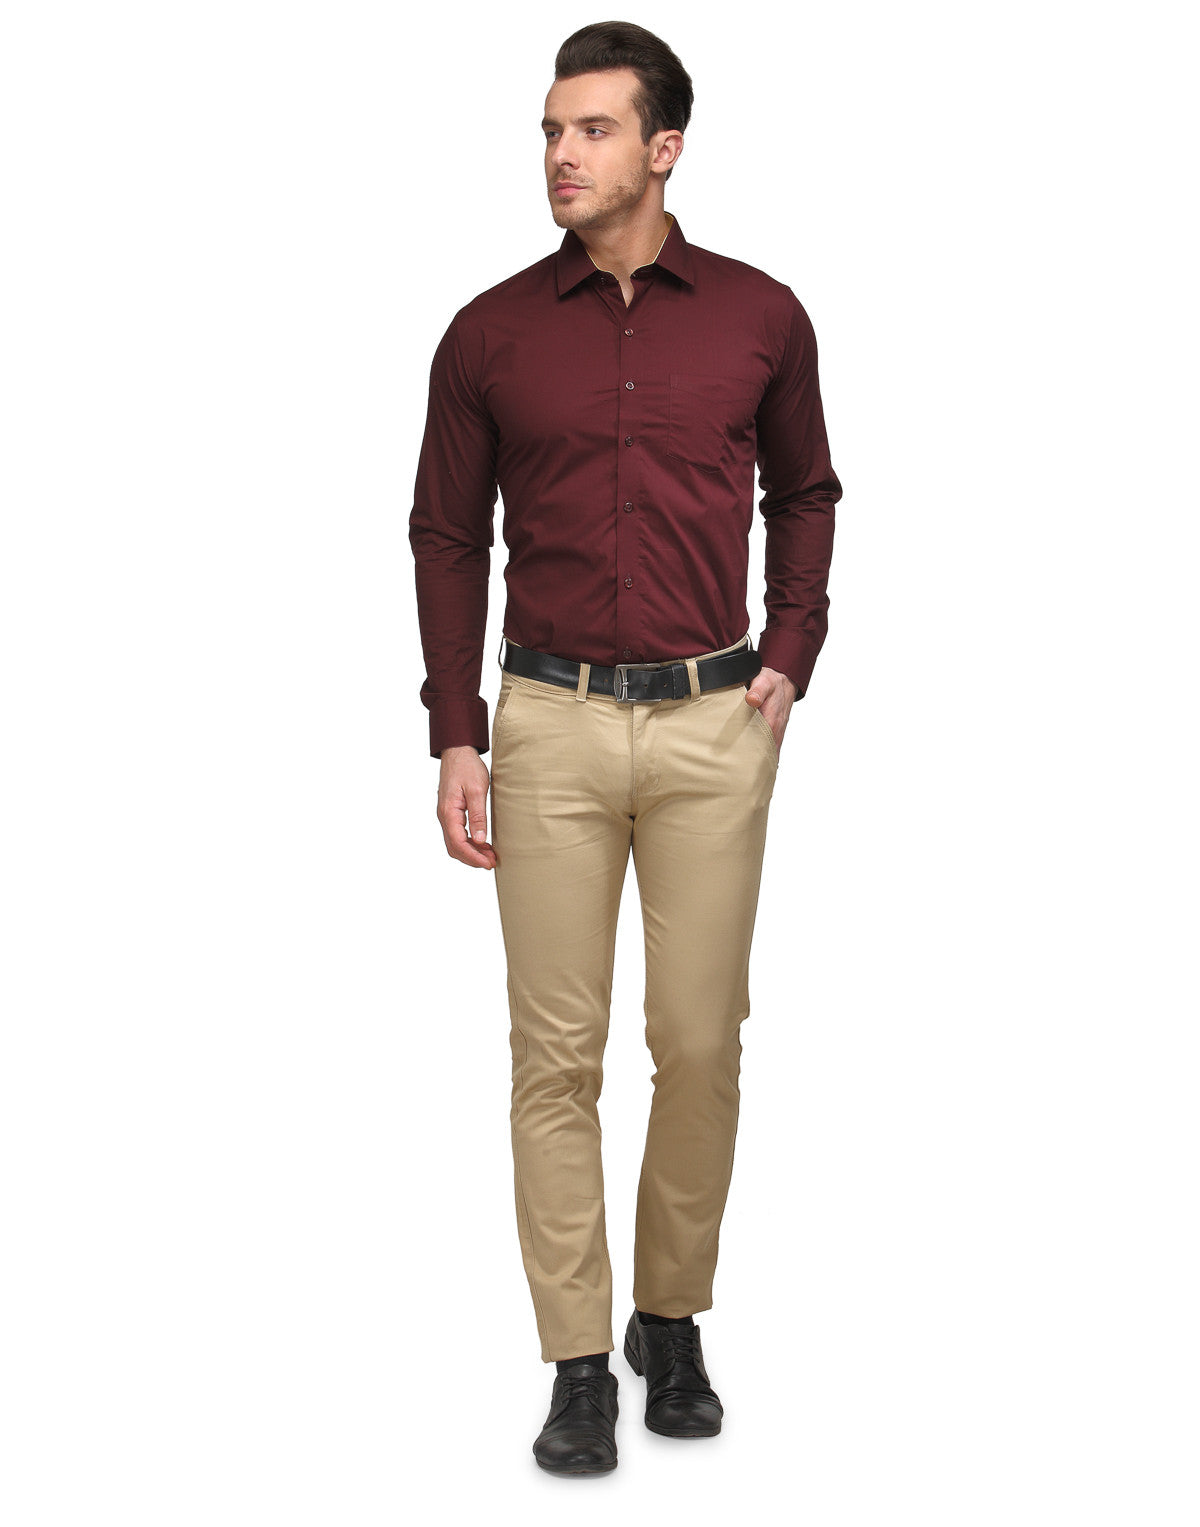 White pants and Maroon Shirt makes a striking combination. @raymondsspaldi  is all about elegant combinations for the da… | Maroon shirts, Casual wear,  White pants